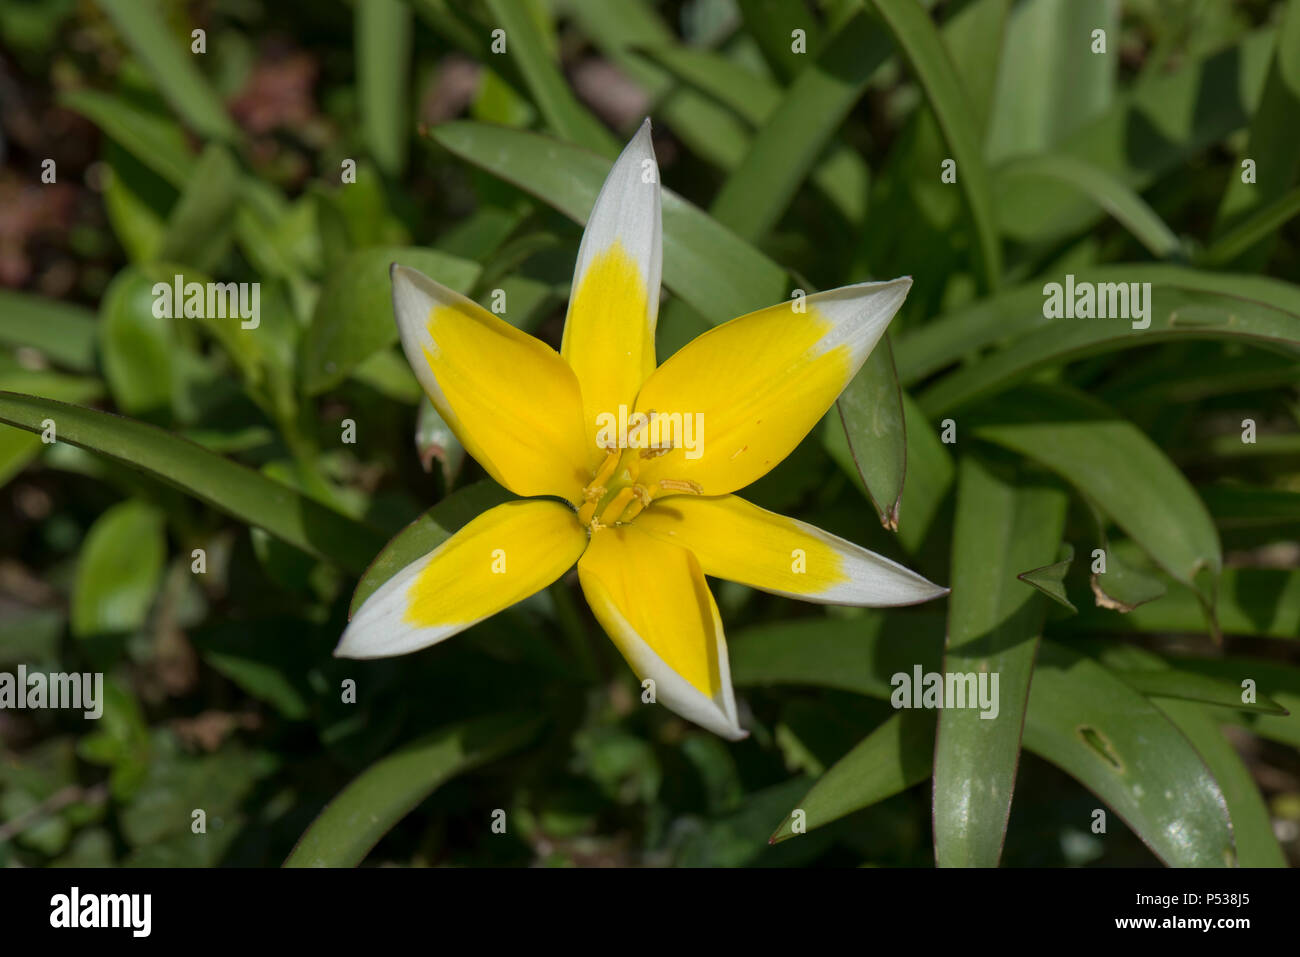 Yellow and white flowers of species tulip, Tulipa tarda, low growing garden bulb on a rockery in April Stock Photo